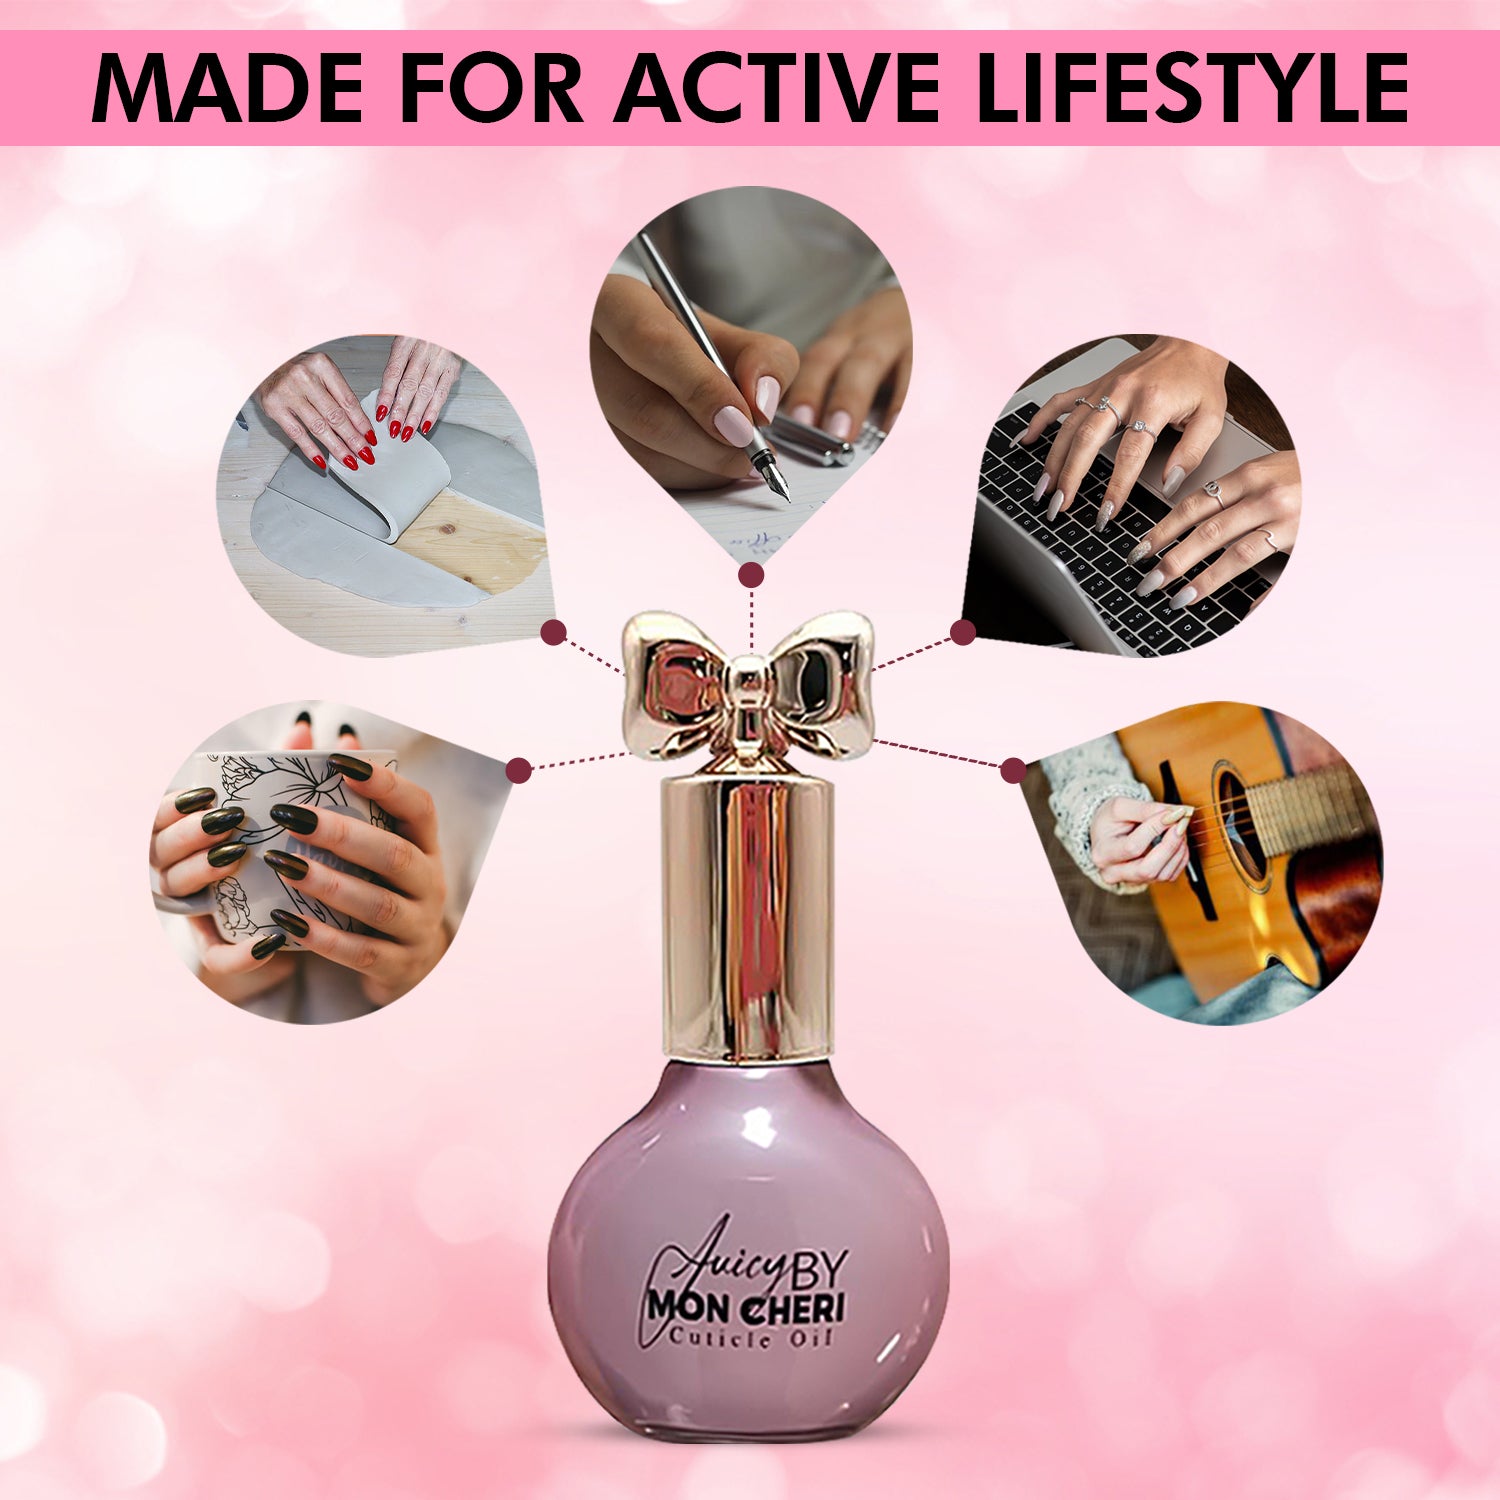 Allure Pheromone-Scented Cuticle Oil by Juicy by Mon Cheri: Attract and Entice